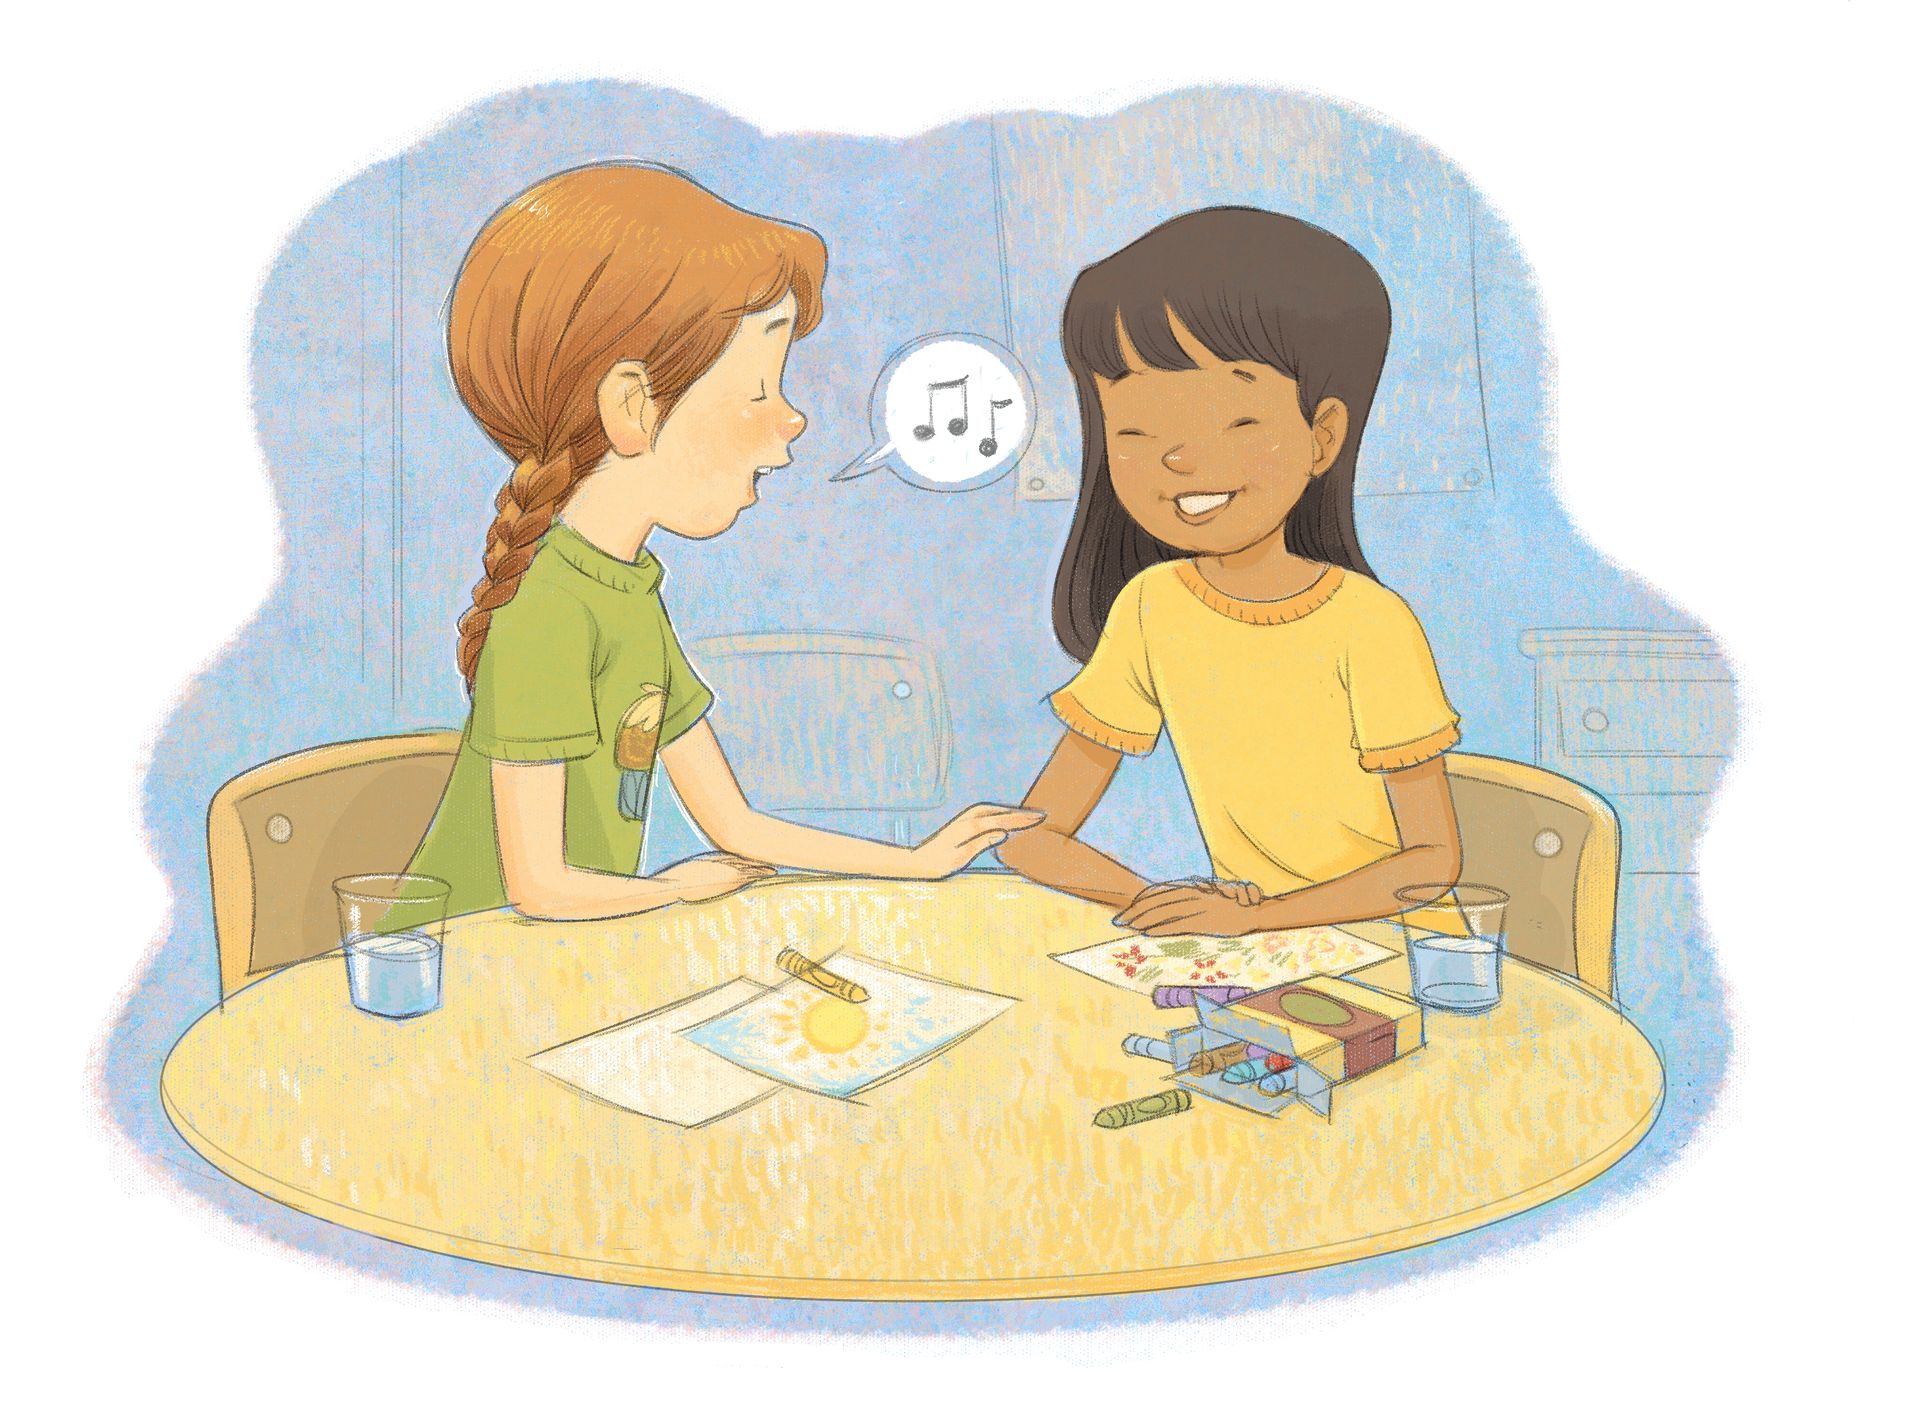 A girl sings to her friend while they sit at a table together.